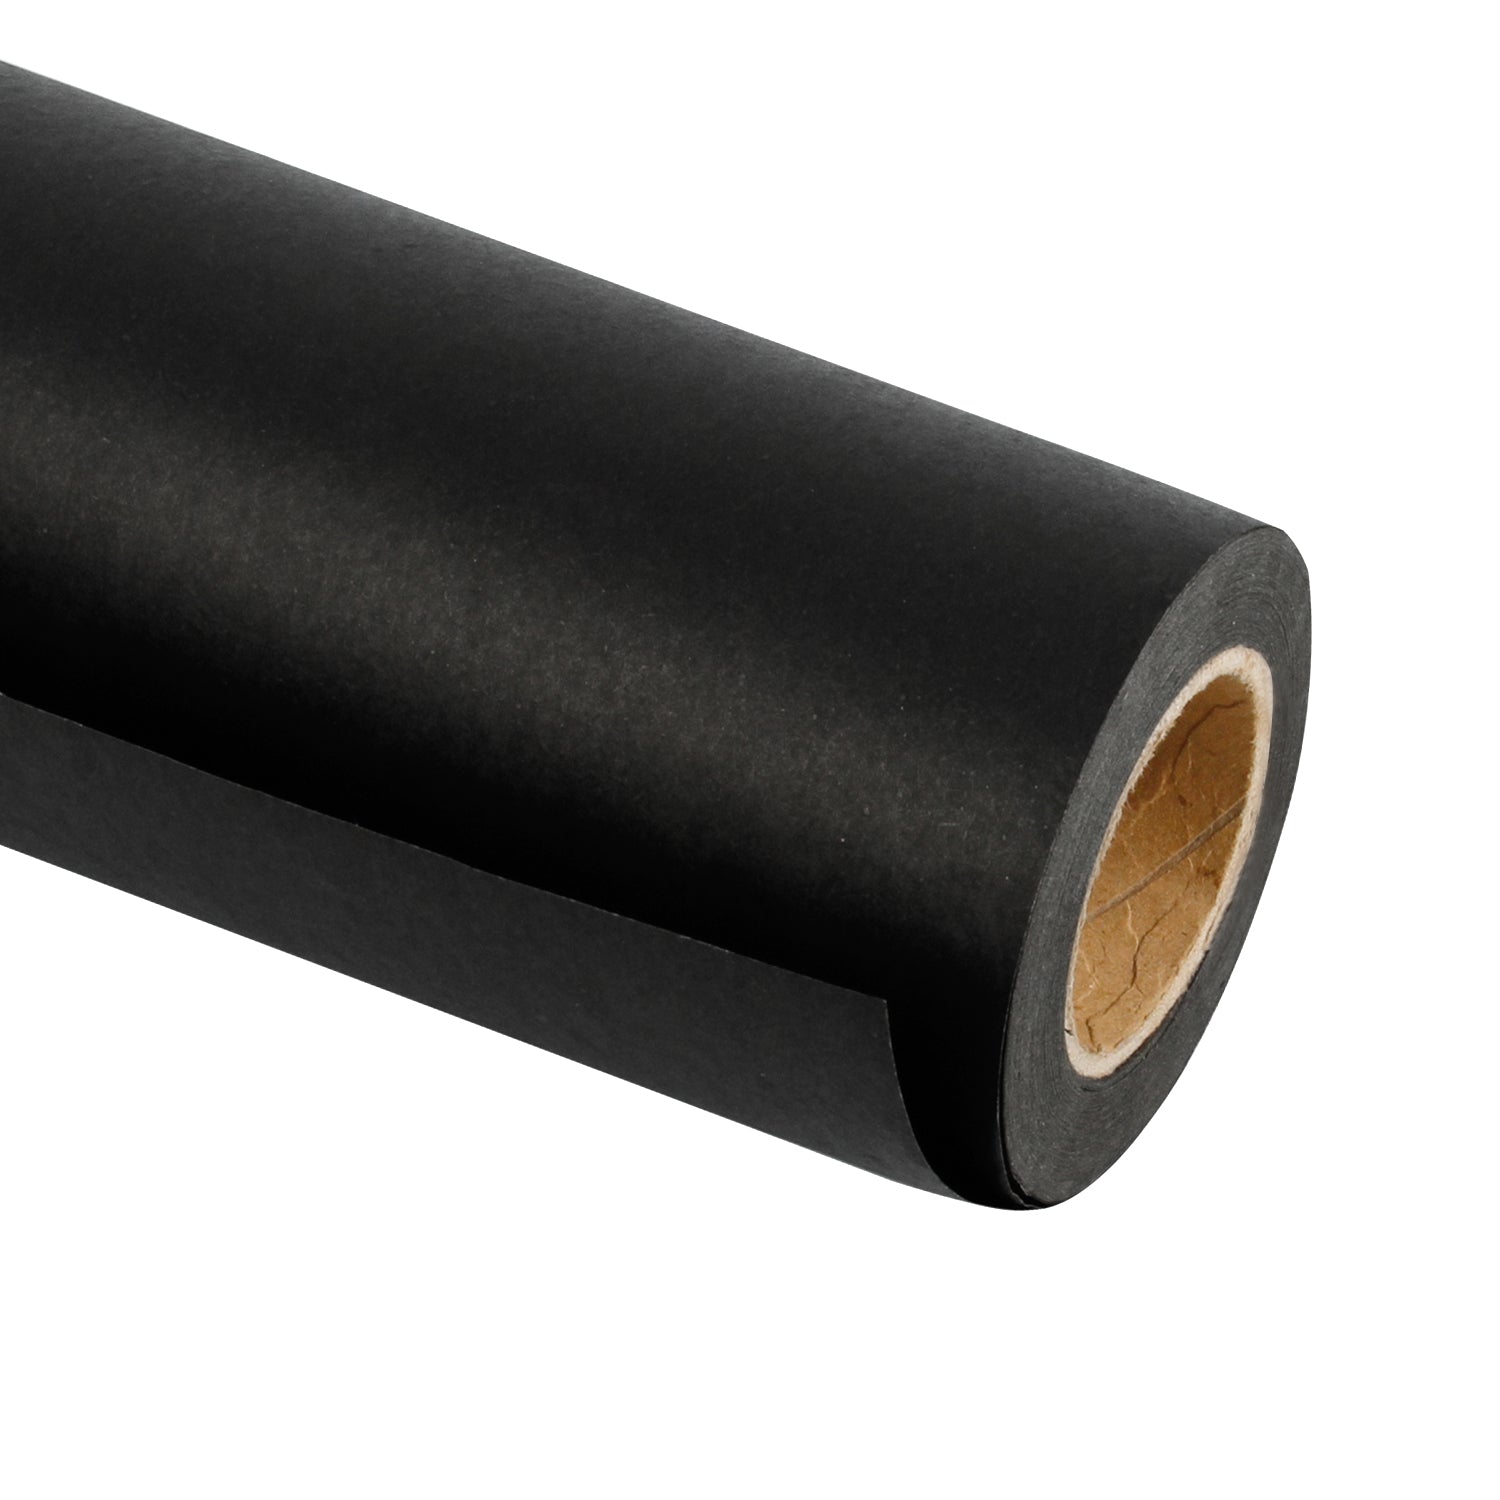  RUSPEPA Kraft Wrapping Paper Rolls - 17 inches x 10 feet per  Roll, Total of 4 Rolls, Black Sketch Design : Health & Household